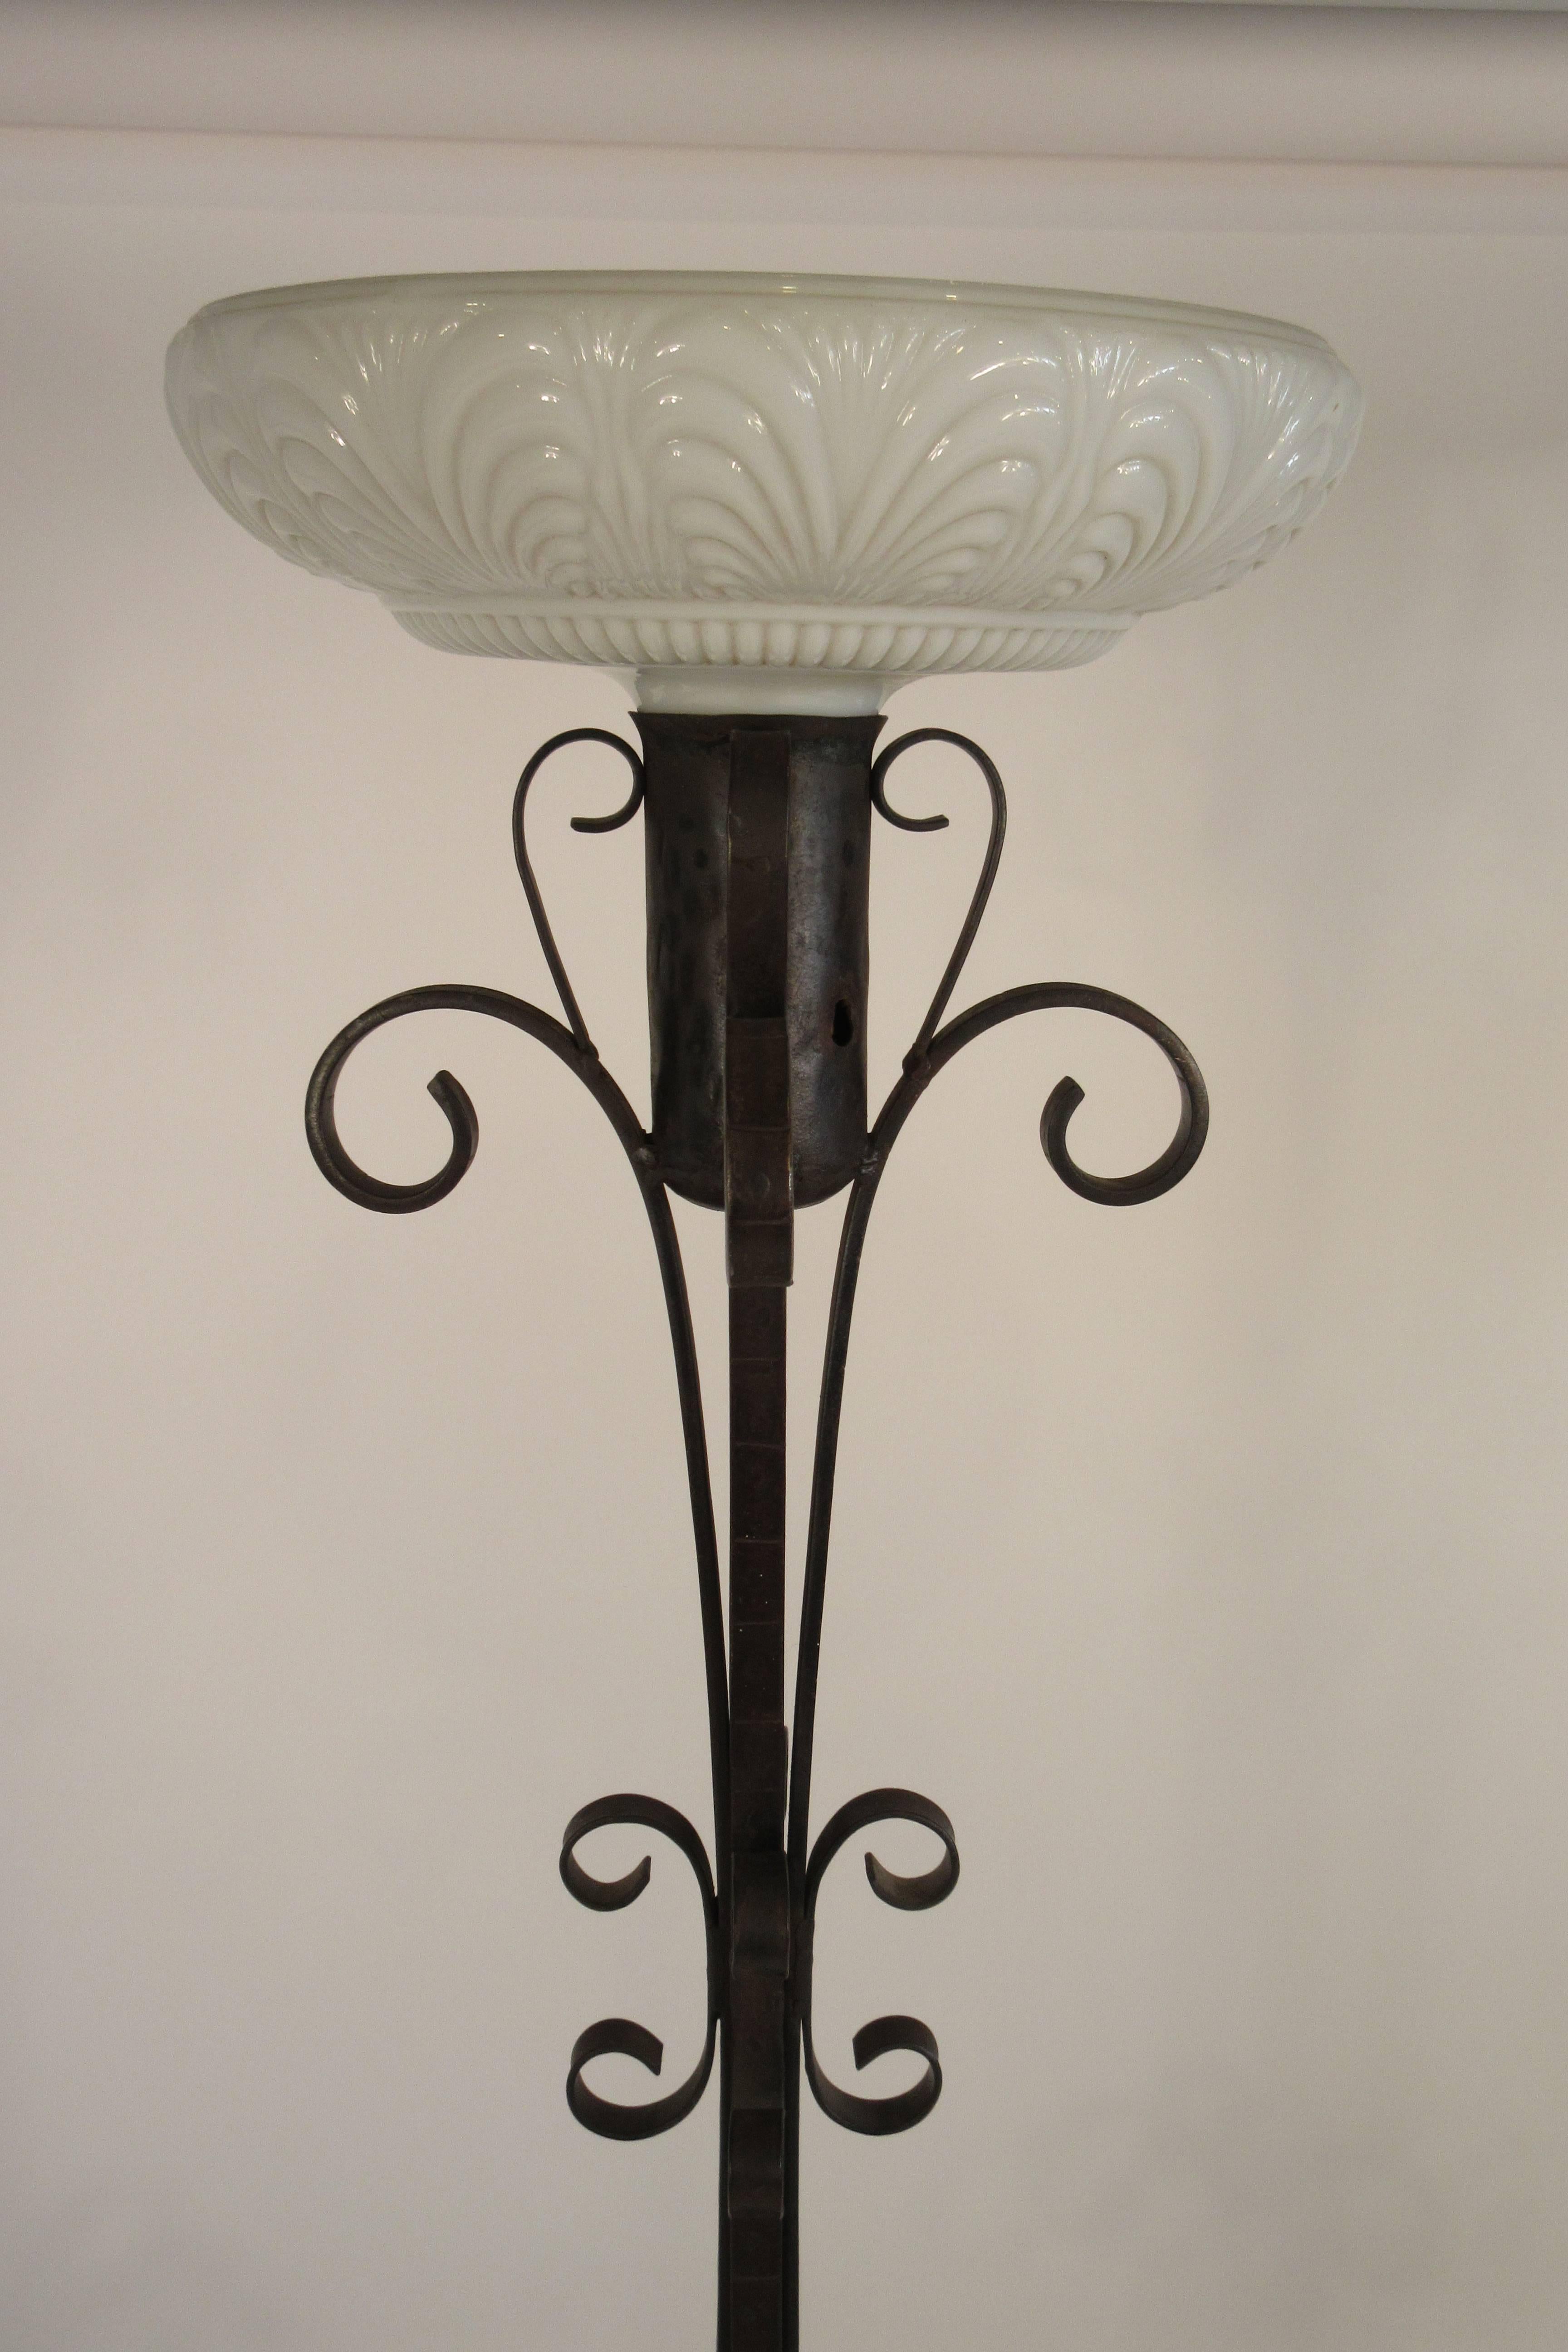 Mid-20th Century 1940s Wrought Iron Floor Lamp For Sale